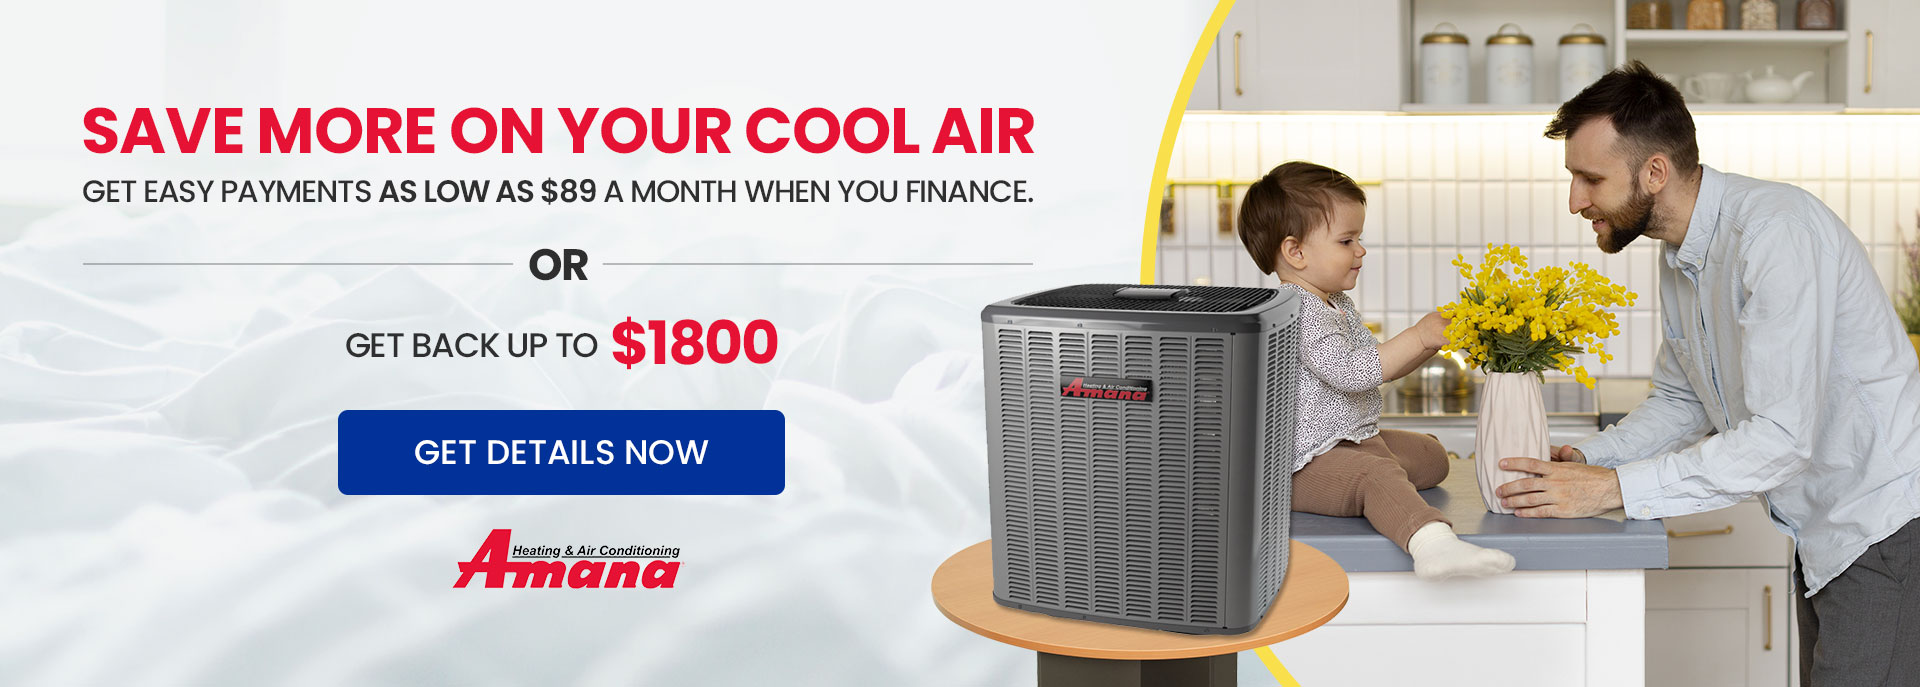 Save on Cool Air